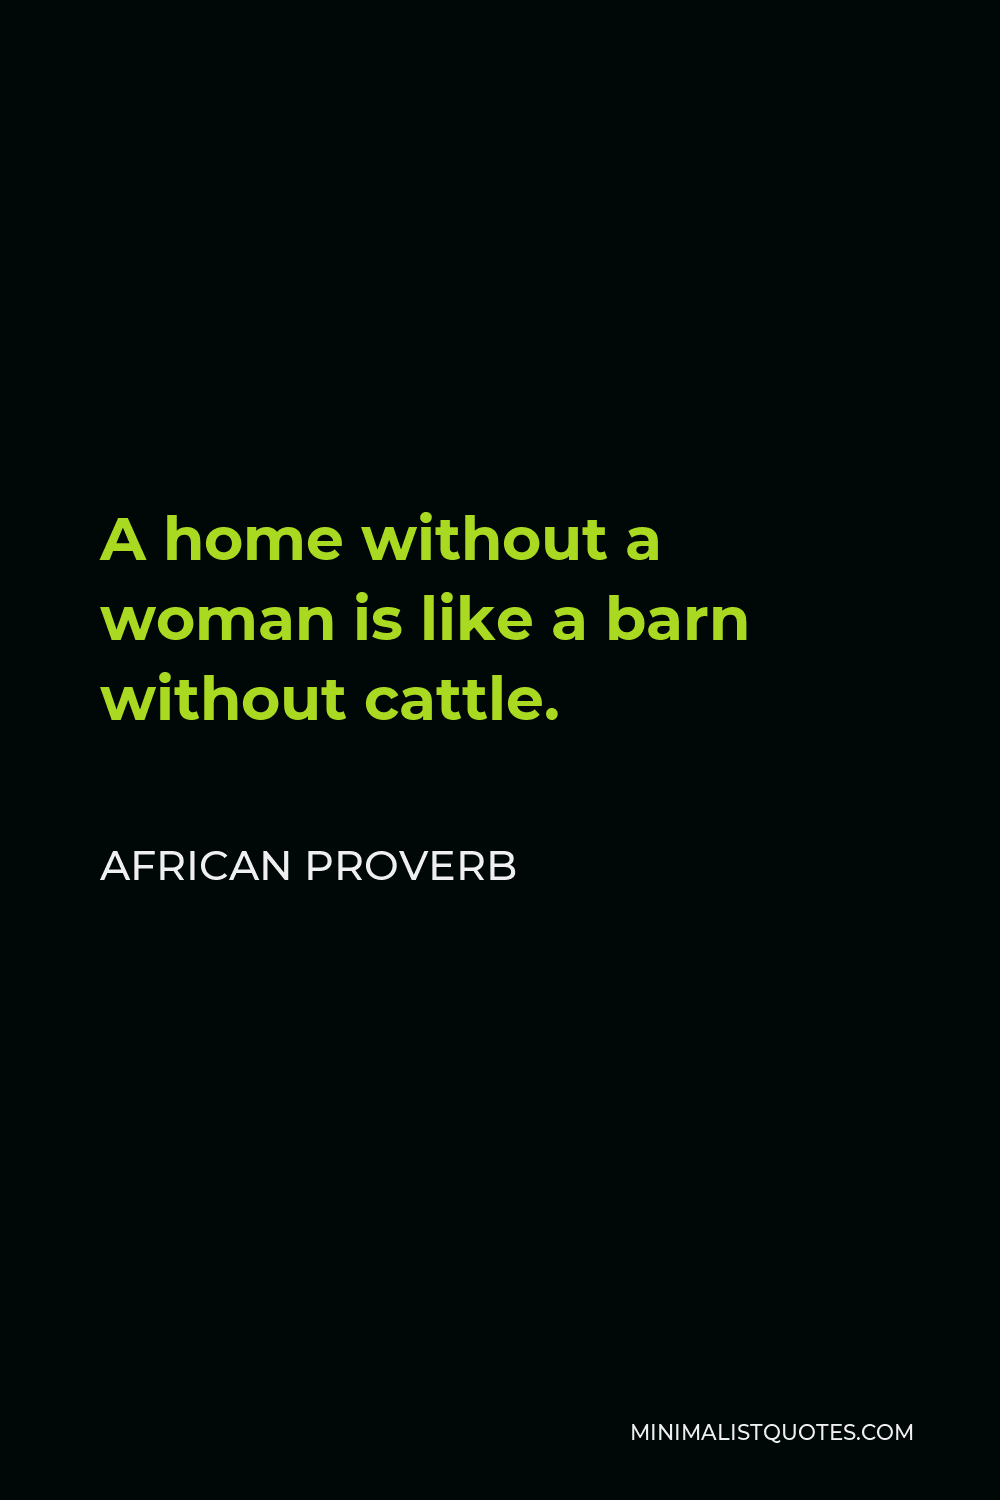 African Proverb Quote - A home without a woman is like a barn without cattle.